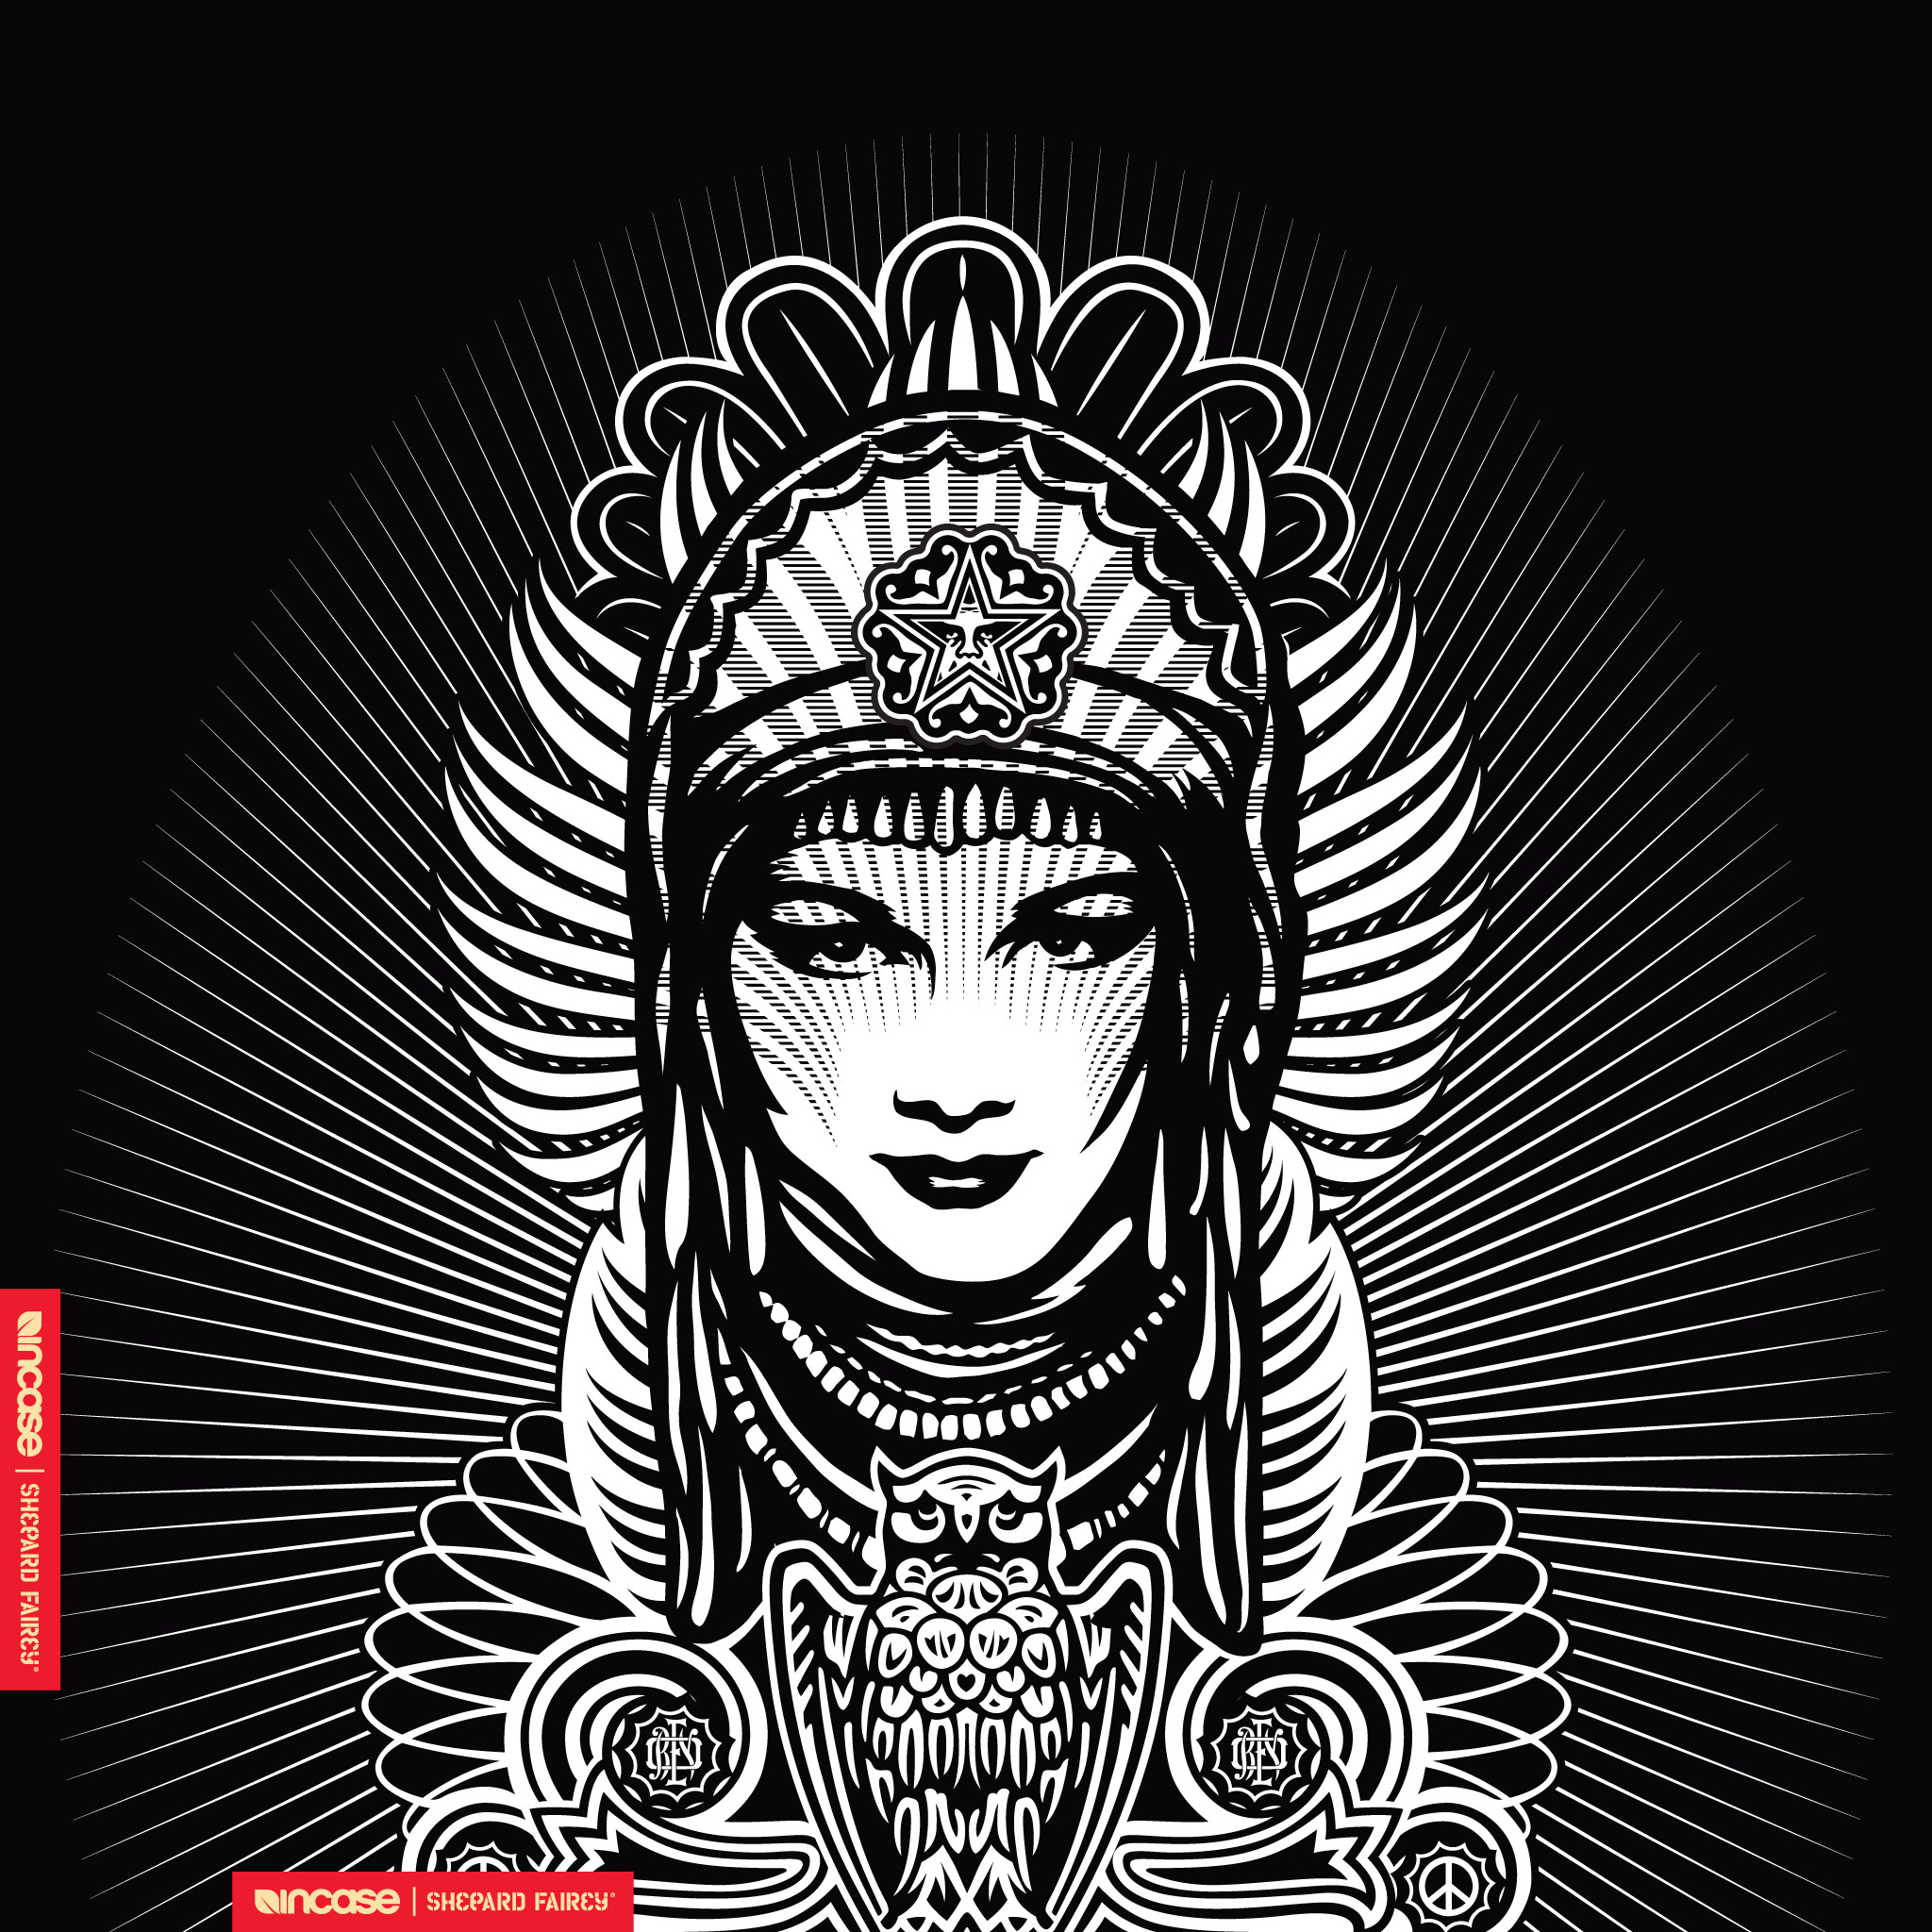 Obey Iphone Wallpaper Obey propagand…